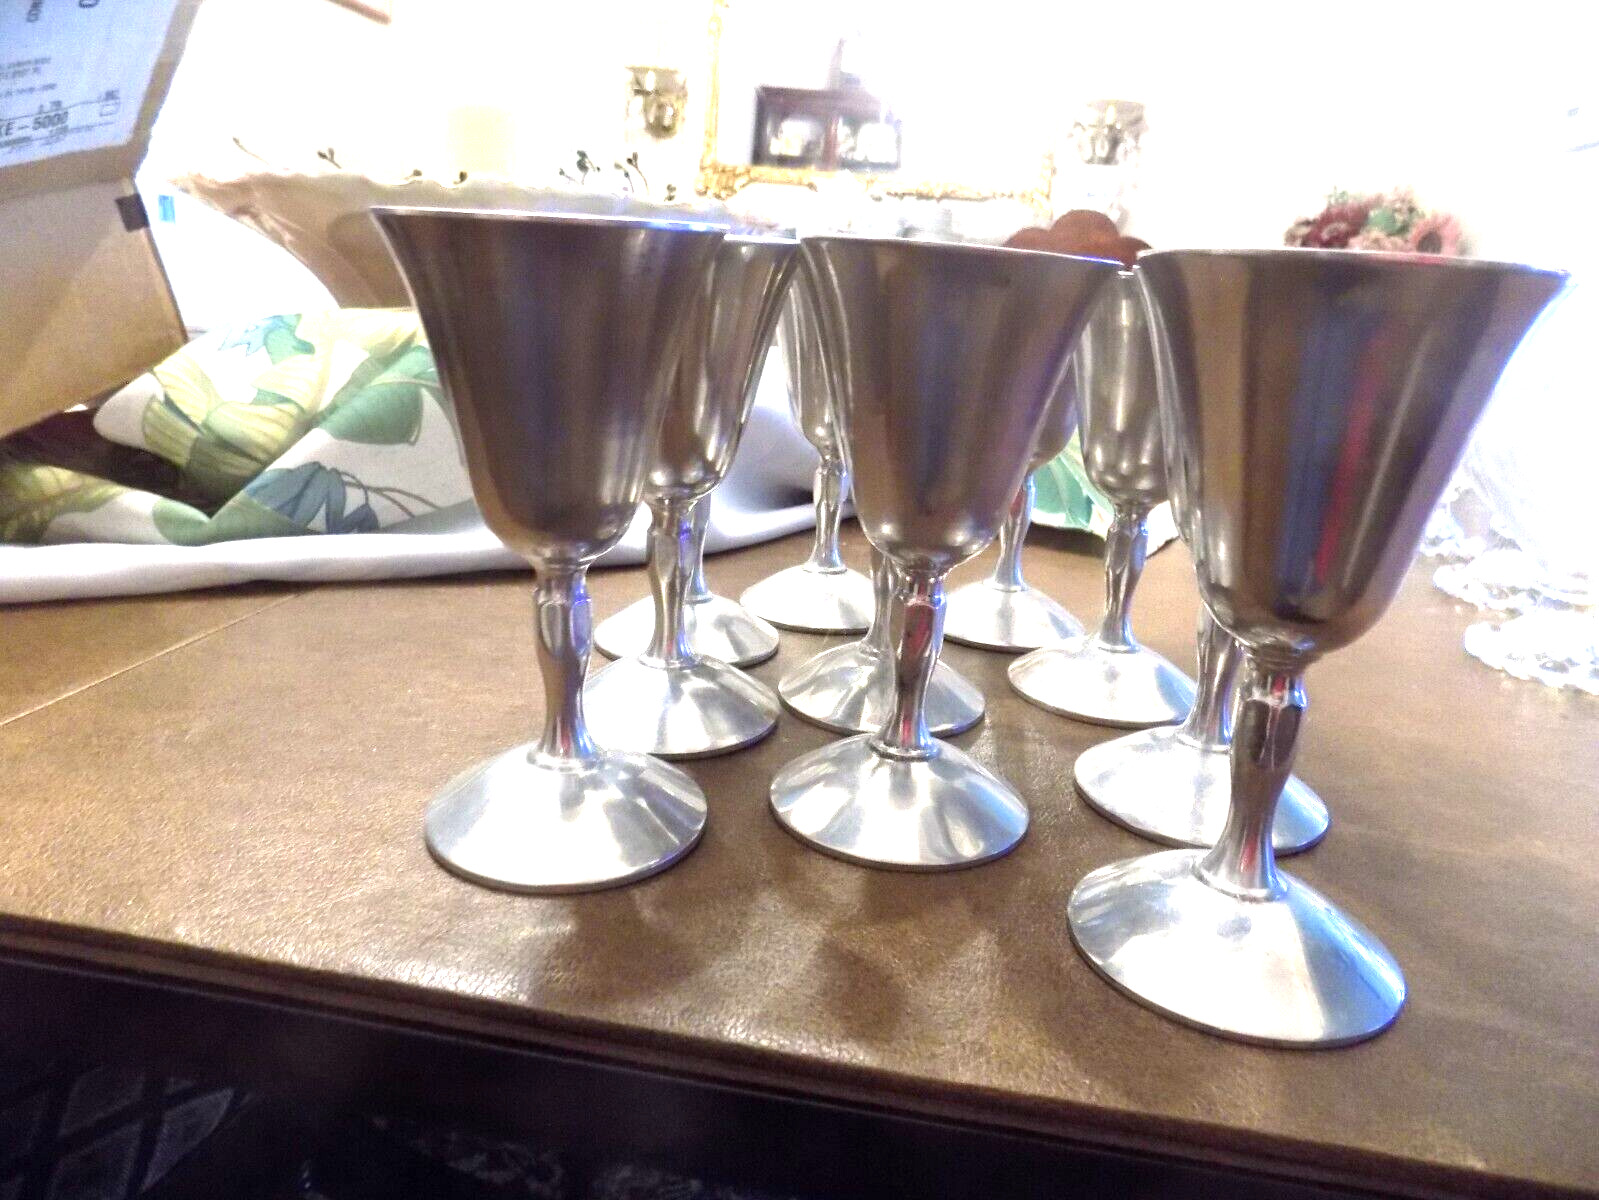 SET OF 10 RAIMOND OF ITALY PEWTER FOOTED WINE GLASSES